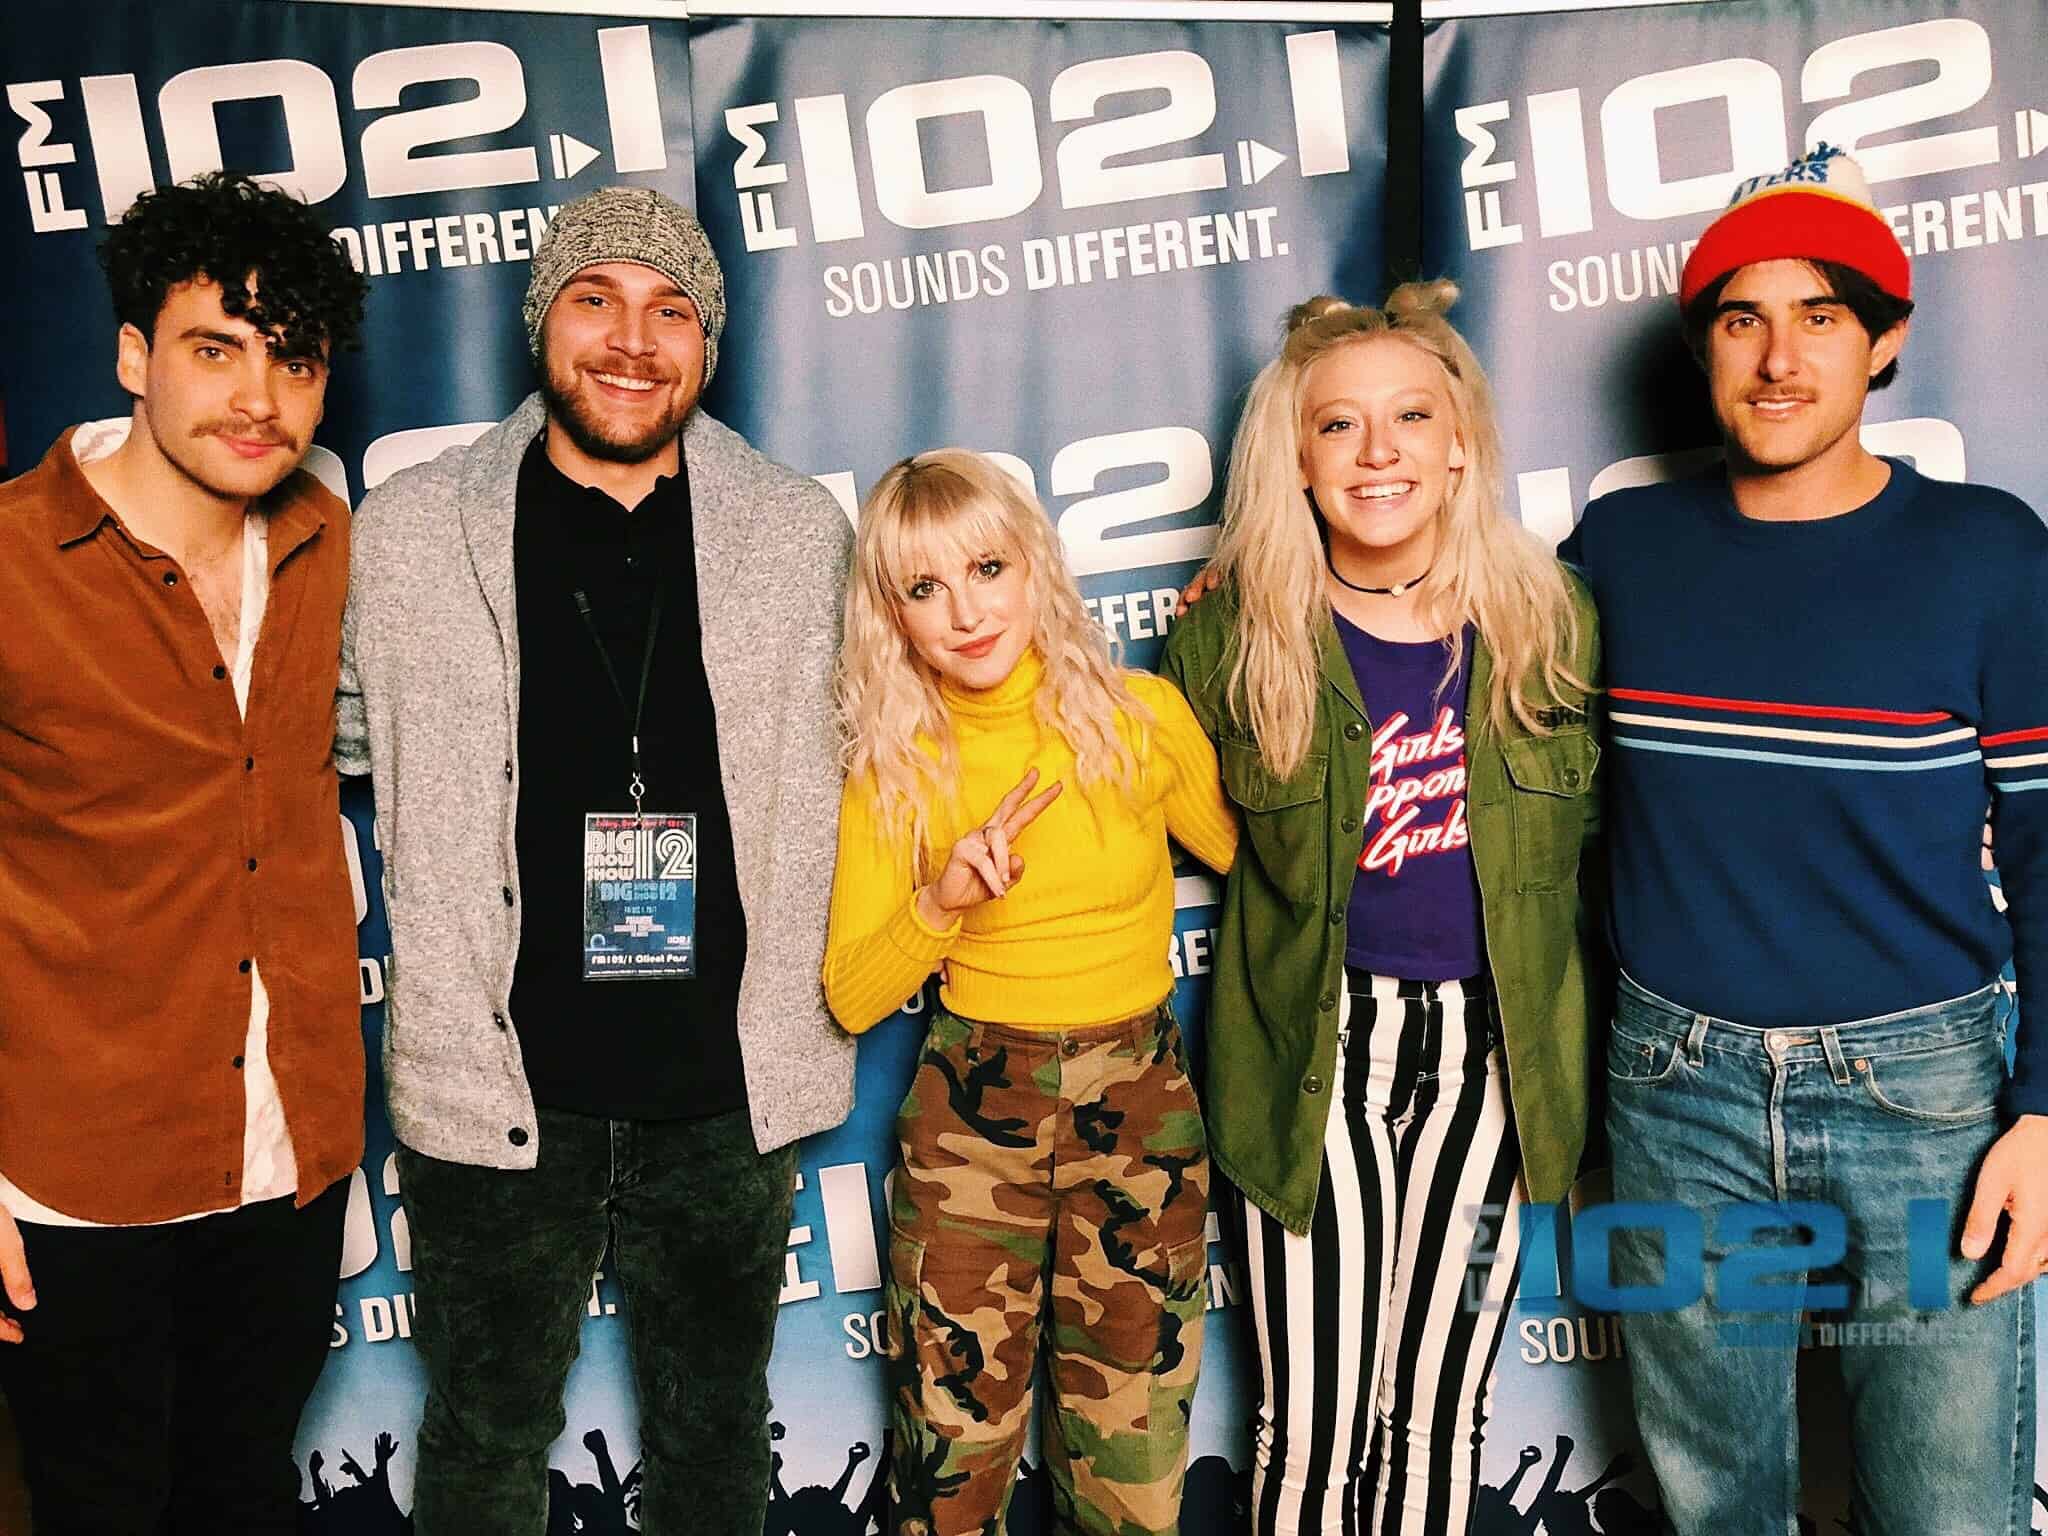 group photo of young people with the band Paramore